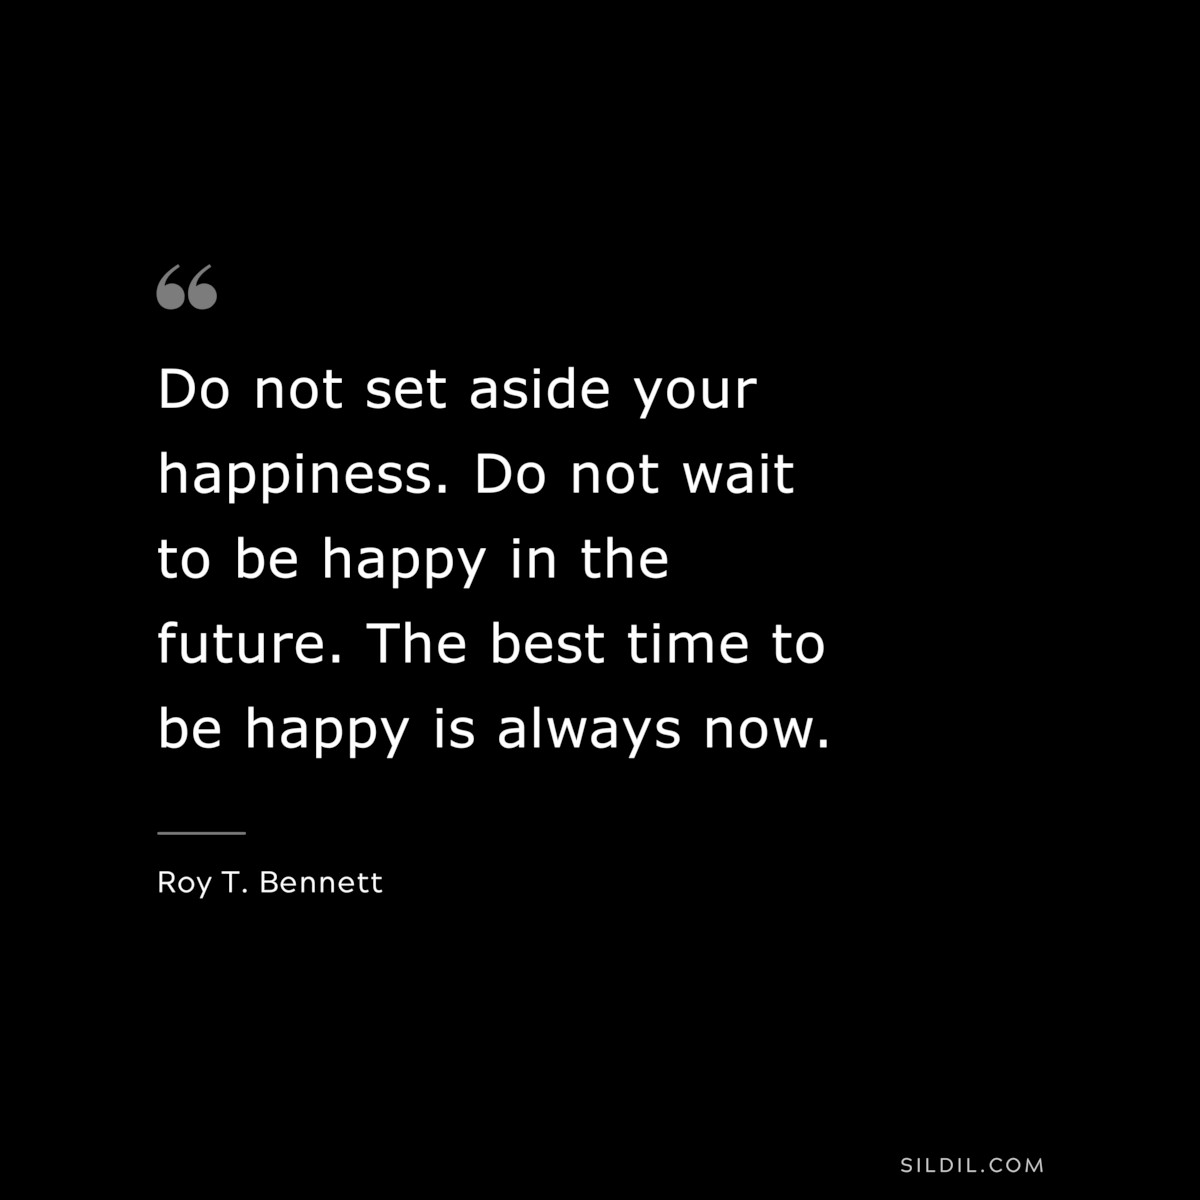 Do not set aside your happiness. Do not wait to be happy in the future. The best time to be happy is always now. ― Roy T. Bennett